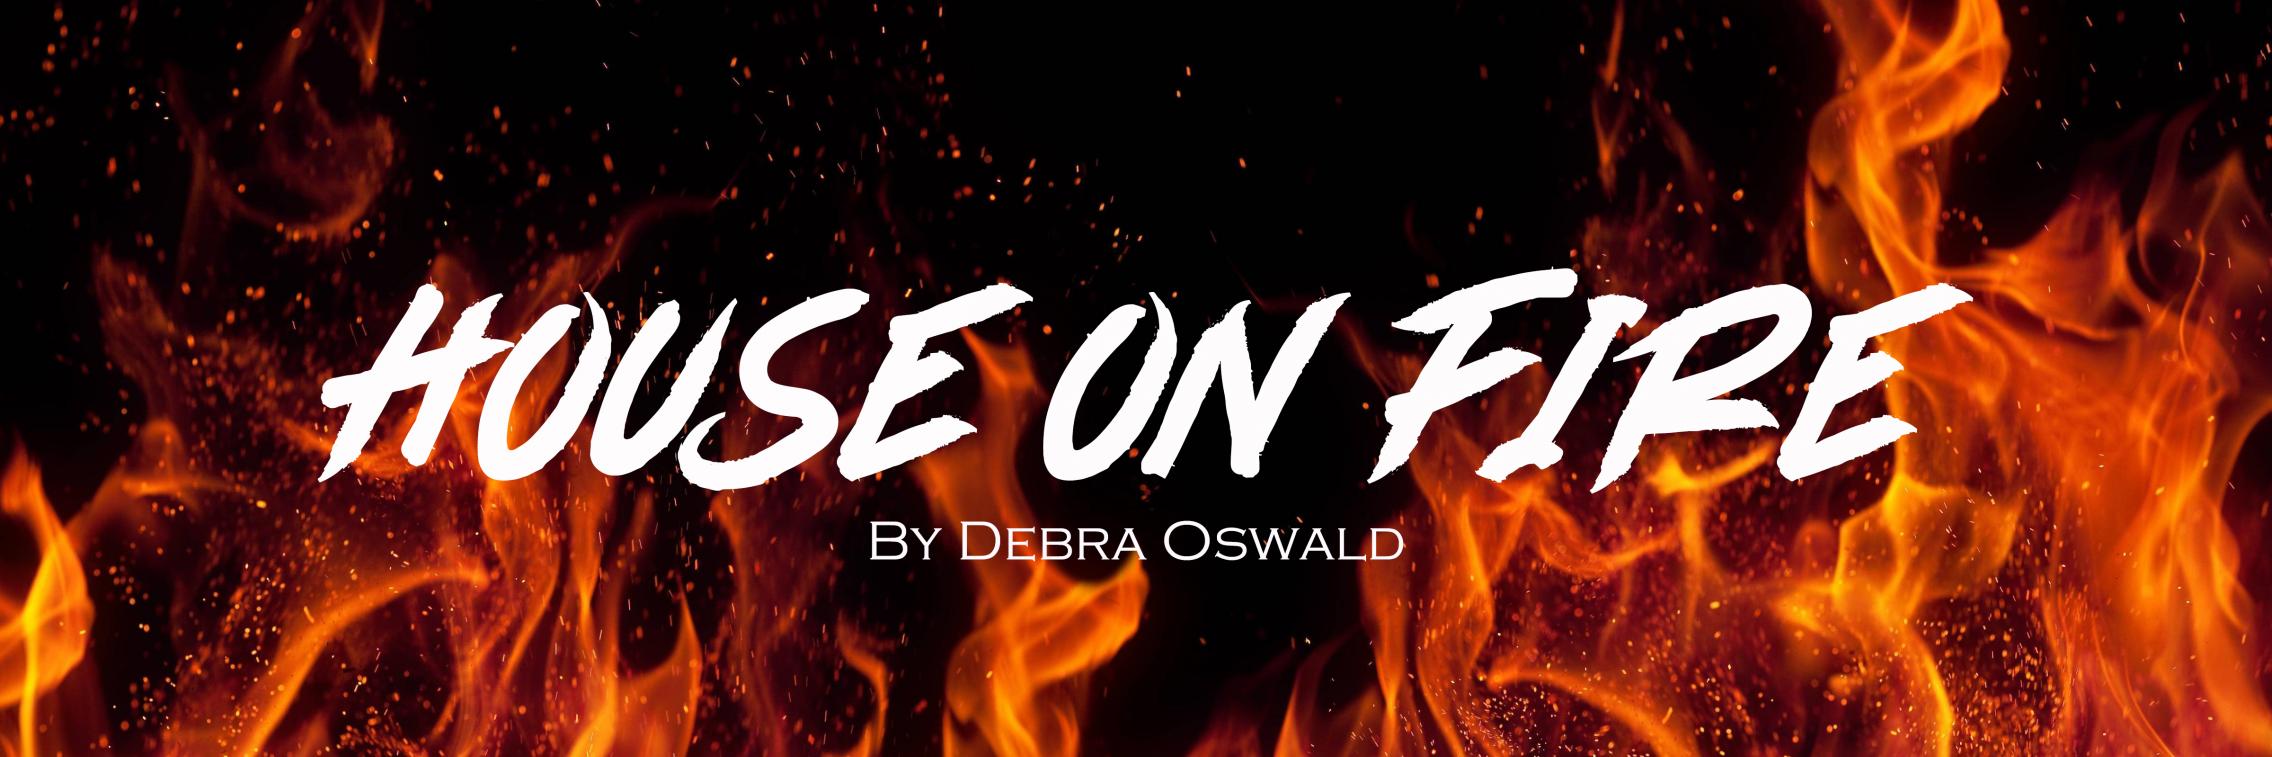 Poster for Year 11 Drama Production of "House on Fire"